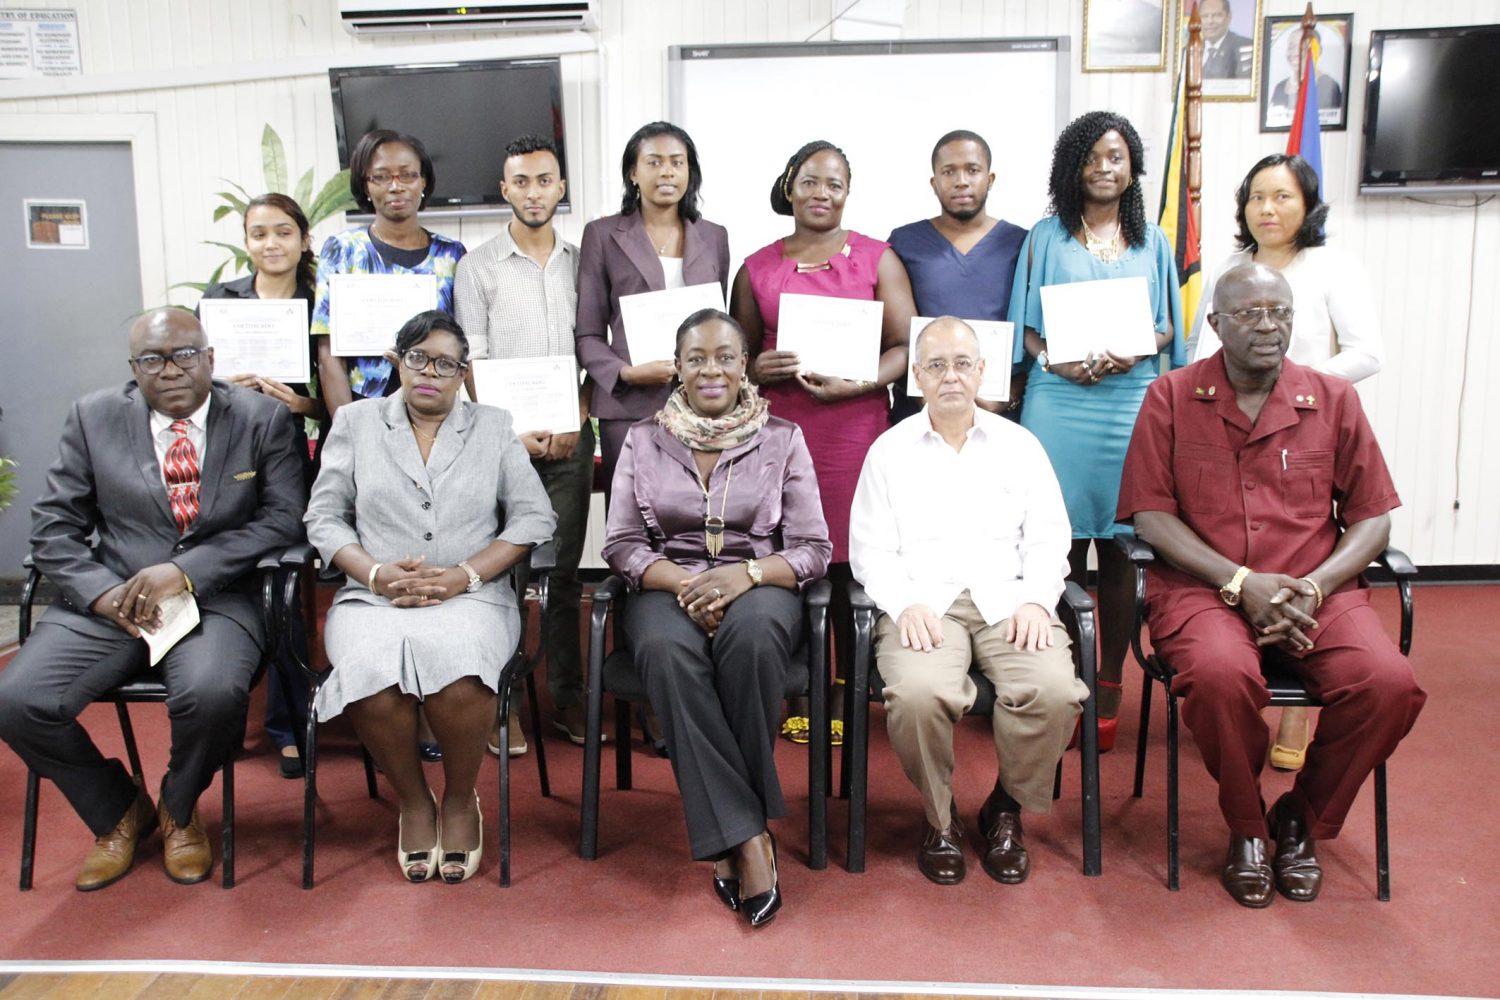 Seated from right are: Permanent Secretary within the Ministry of Education,  Vibert Welch; Cuban Ambassador to Guyana,  Narciso R. A. Socorro; Minister of Education,  Nicolette Henry; Permanent Secretary within the Ministry of Public Health, Colette Adams and Chief Education Officer,  Marcel Hutson.  Standing from right are  Yolanda Williams, June Herod,  Keenan Benjamin, Michelle Nicholas,  Kalina Phillips,  Calvin Lawrie,  Mycinth Robertson and  Kelly Coonjah. 